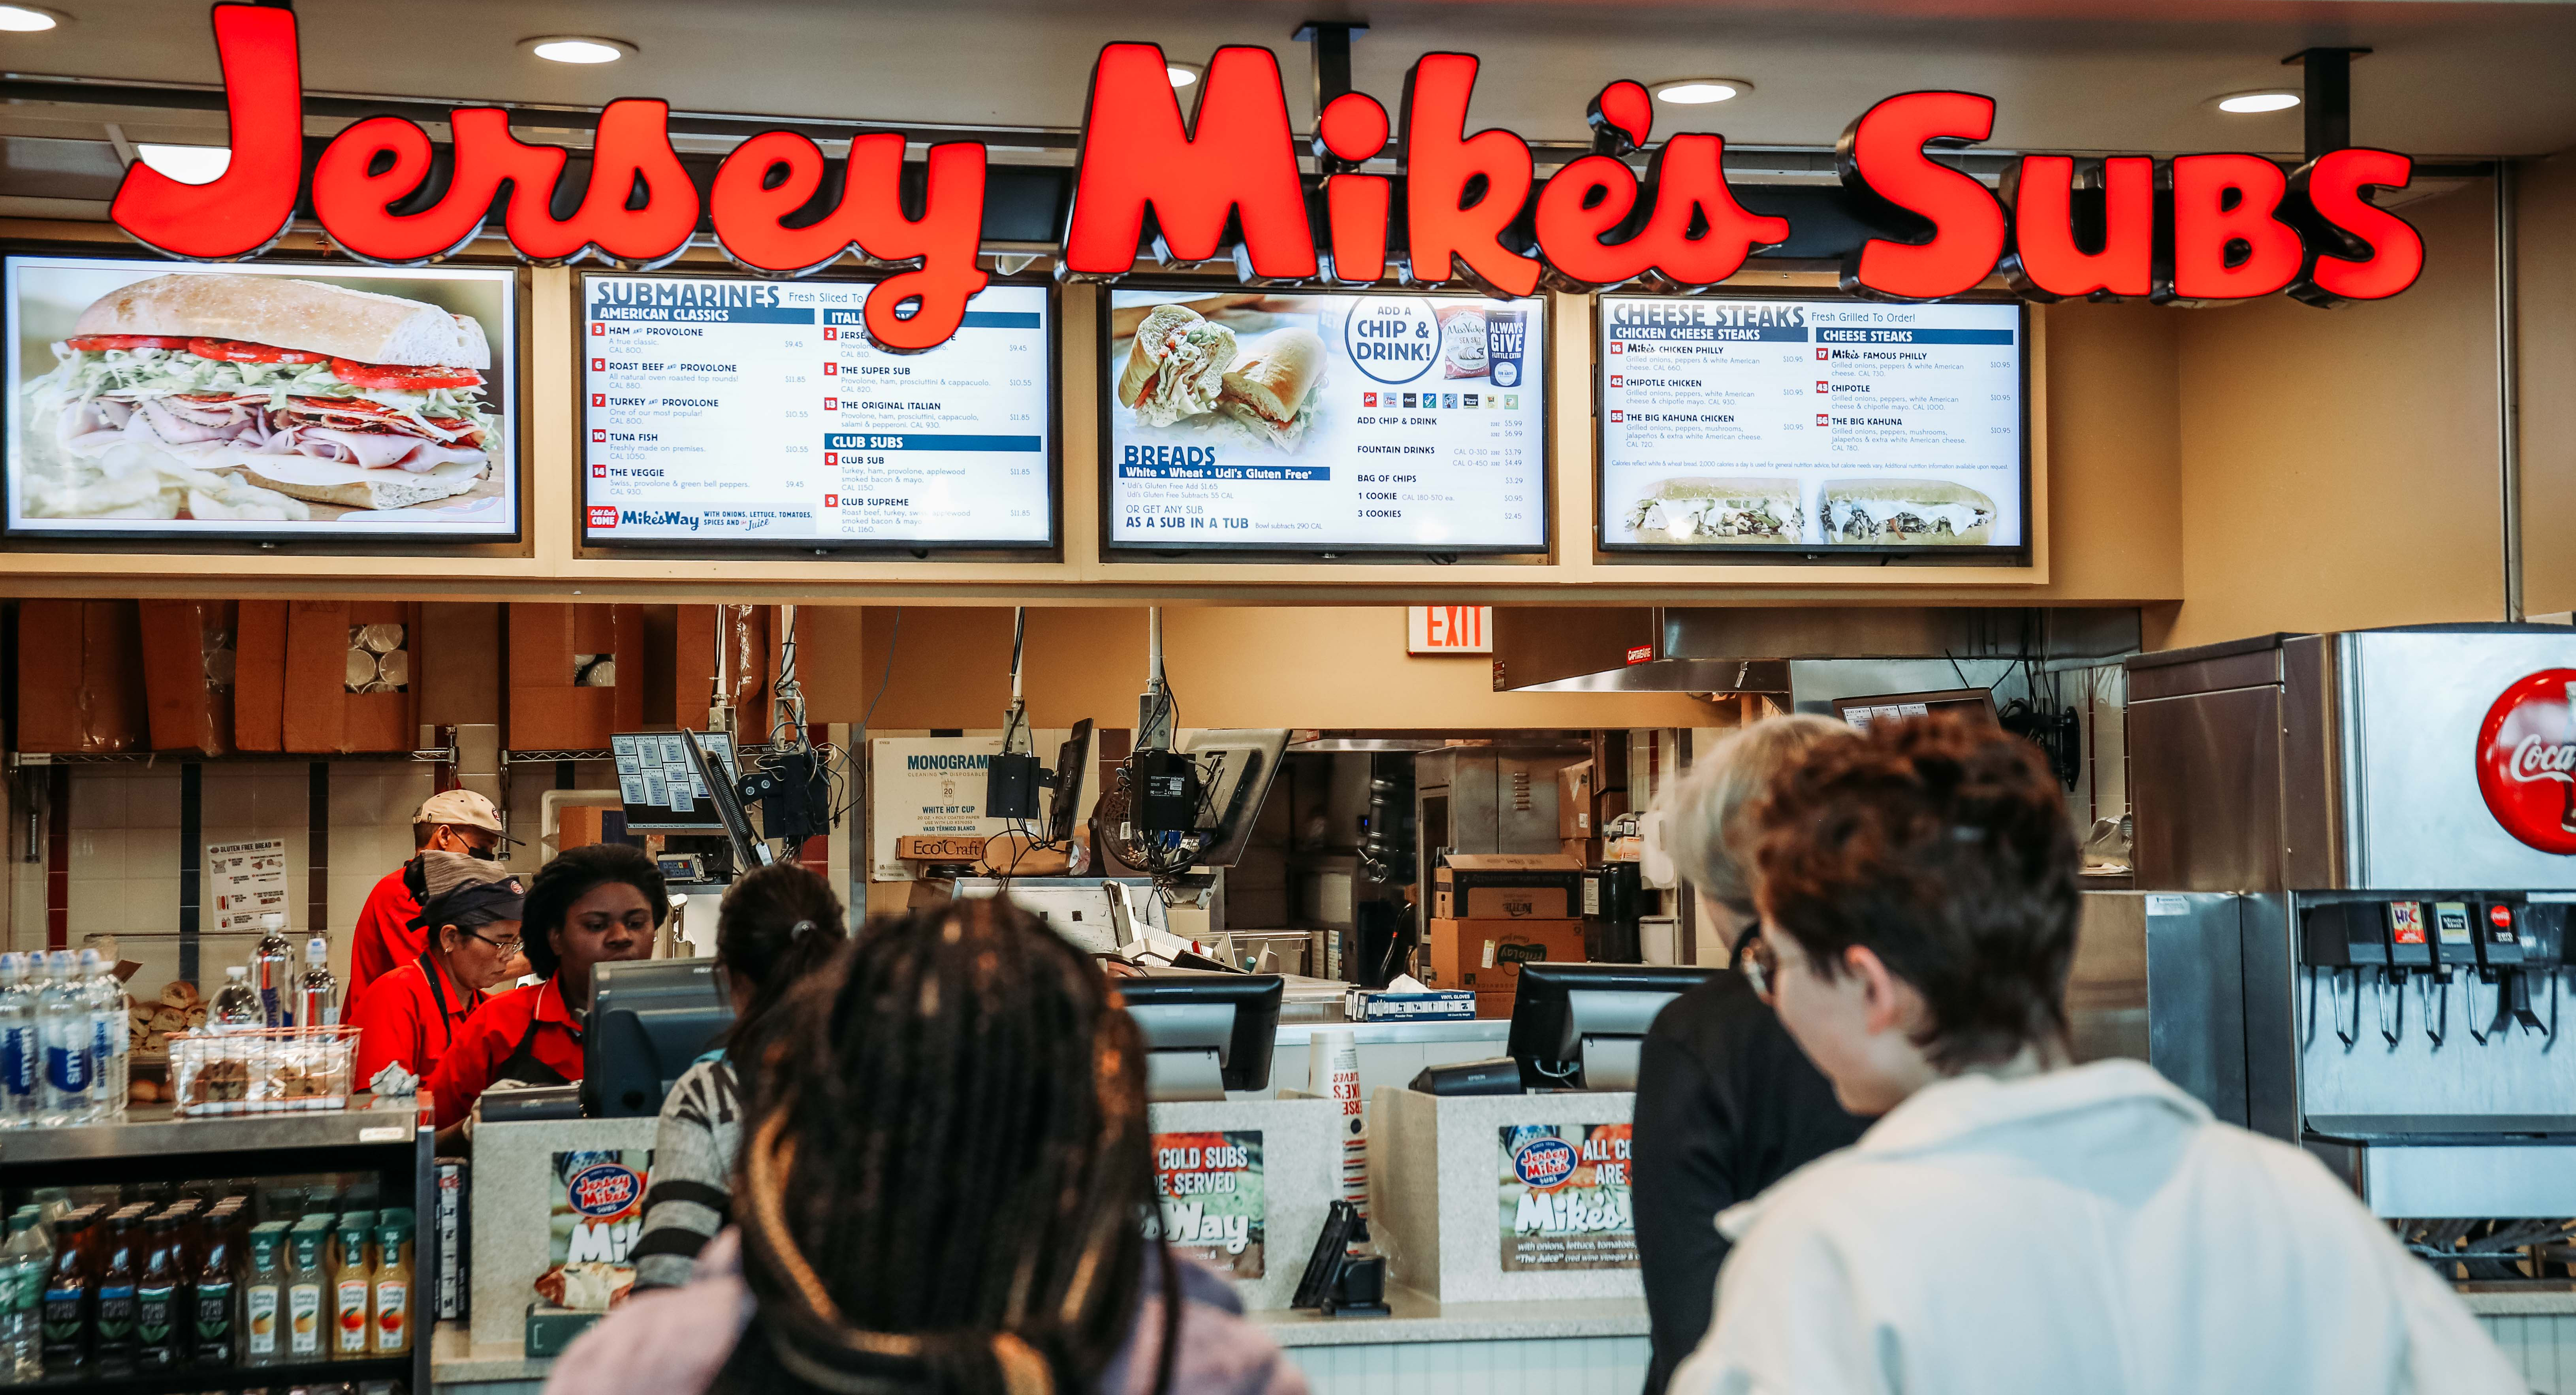 Customers stand in line at the Jersey Mike's restaurant in the Airport atrium while cashiers take and fill orders